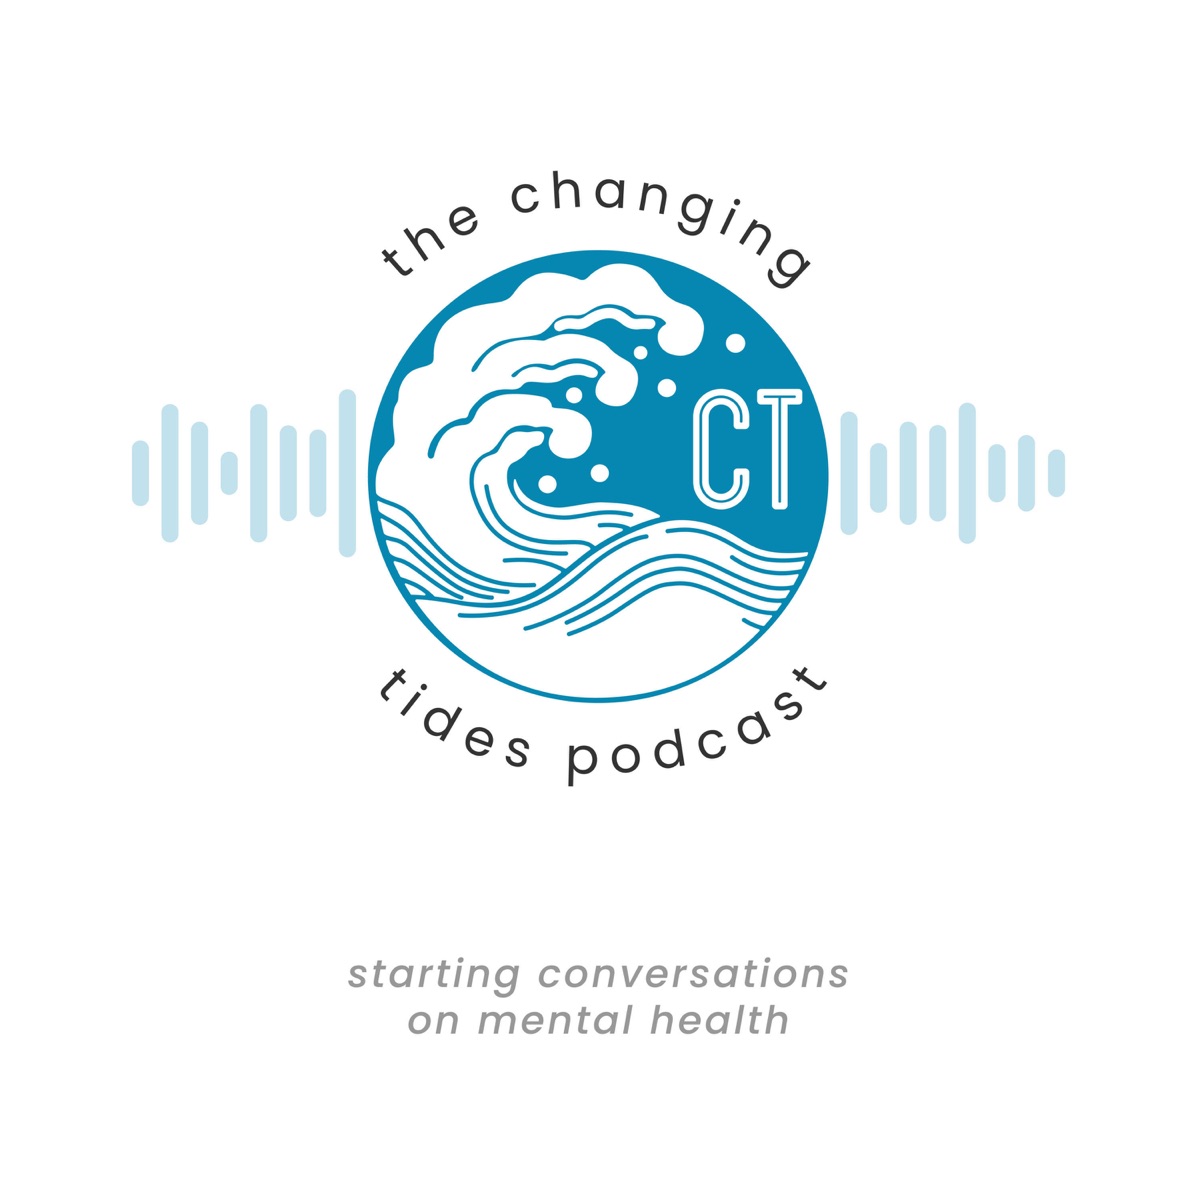 The Changing Tides Podcast